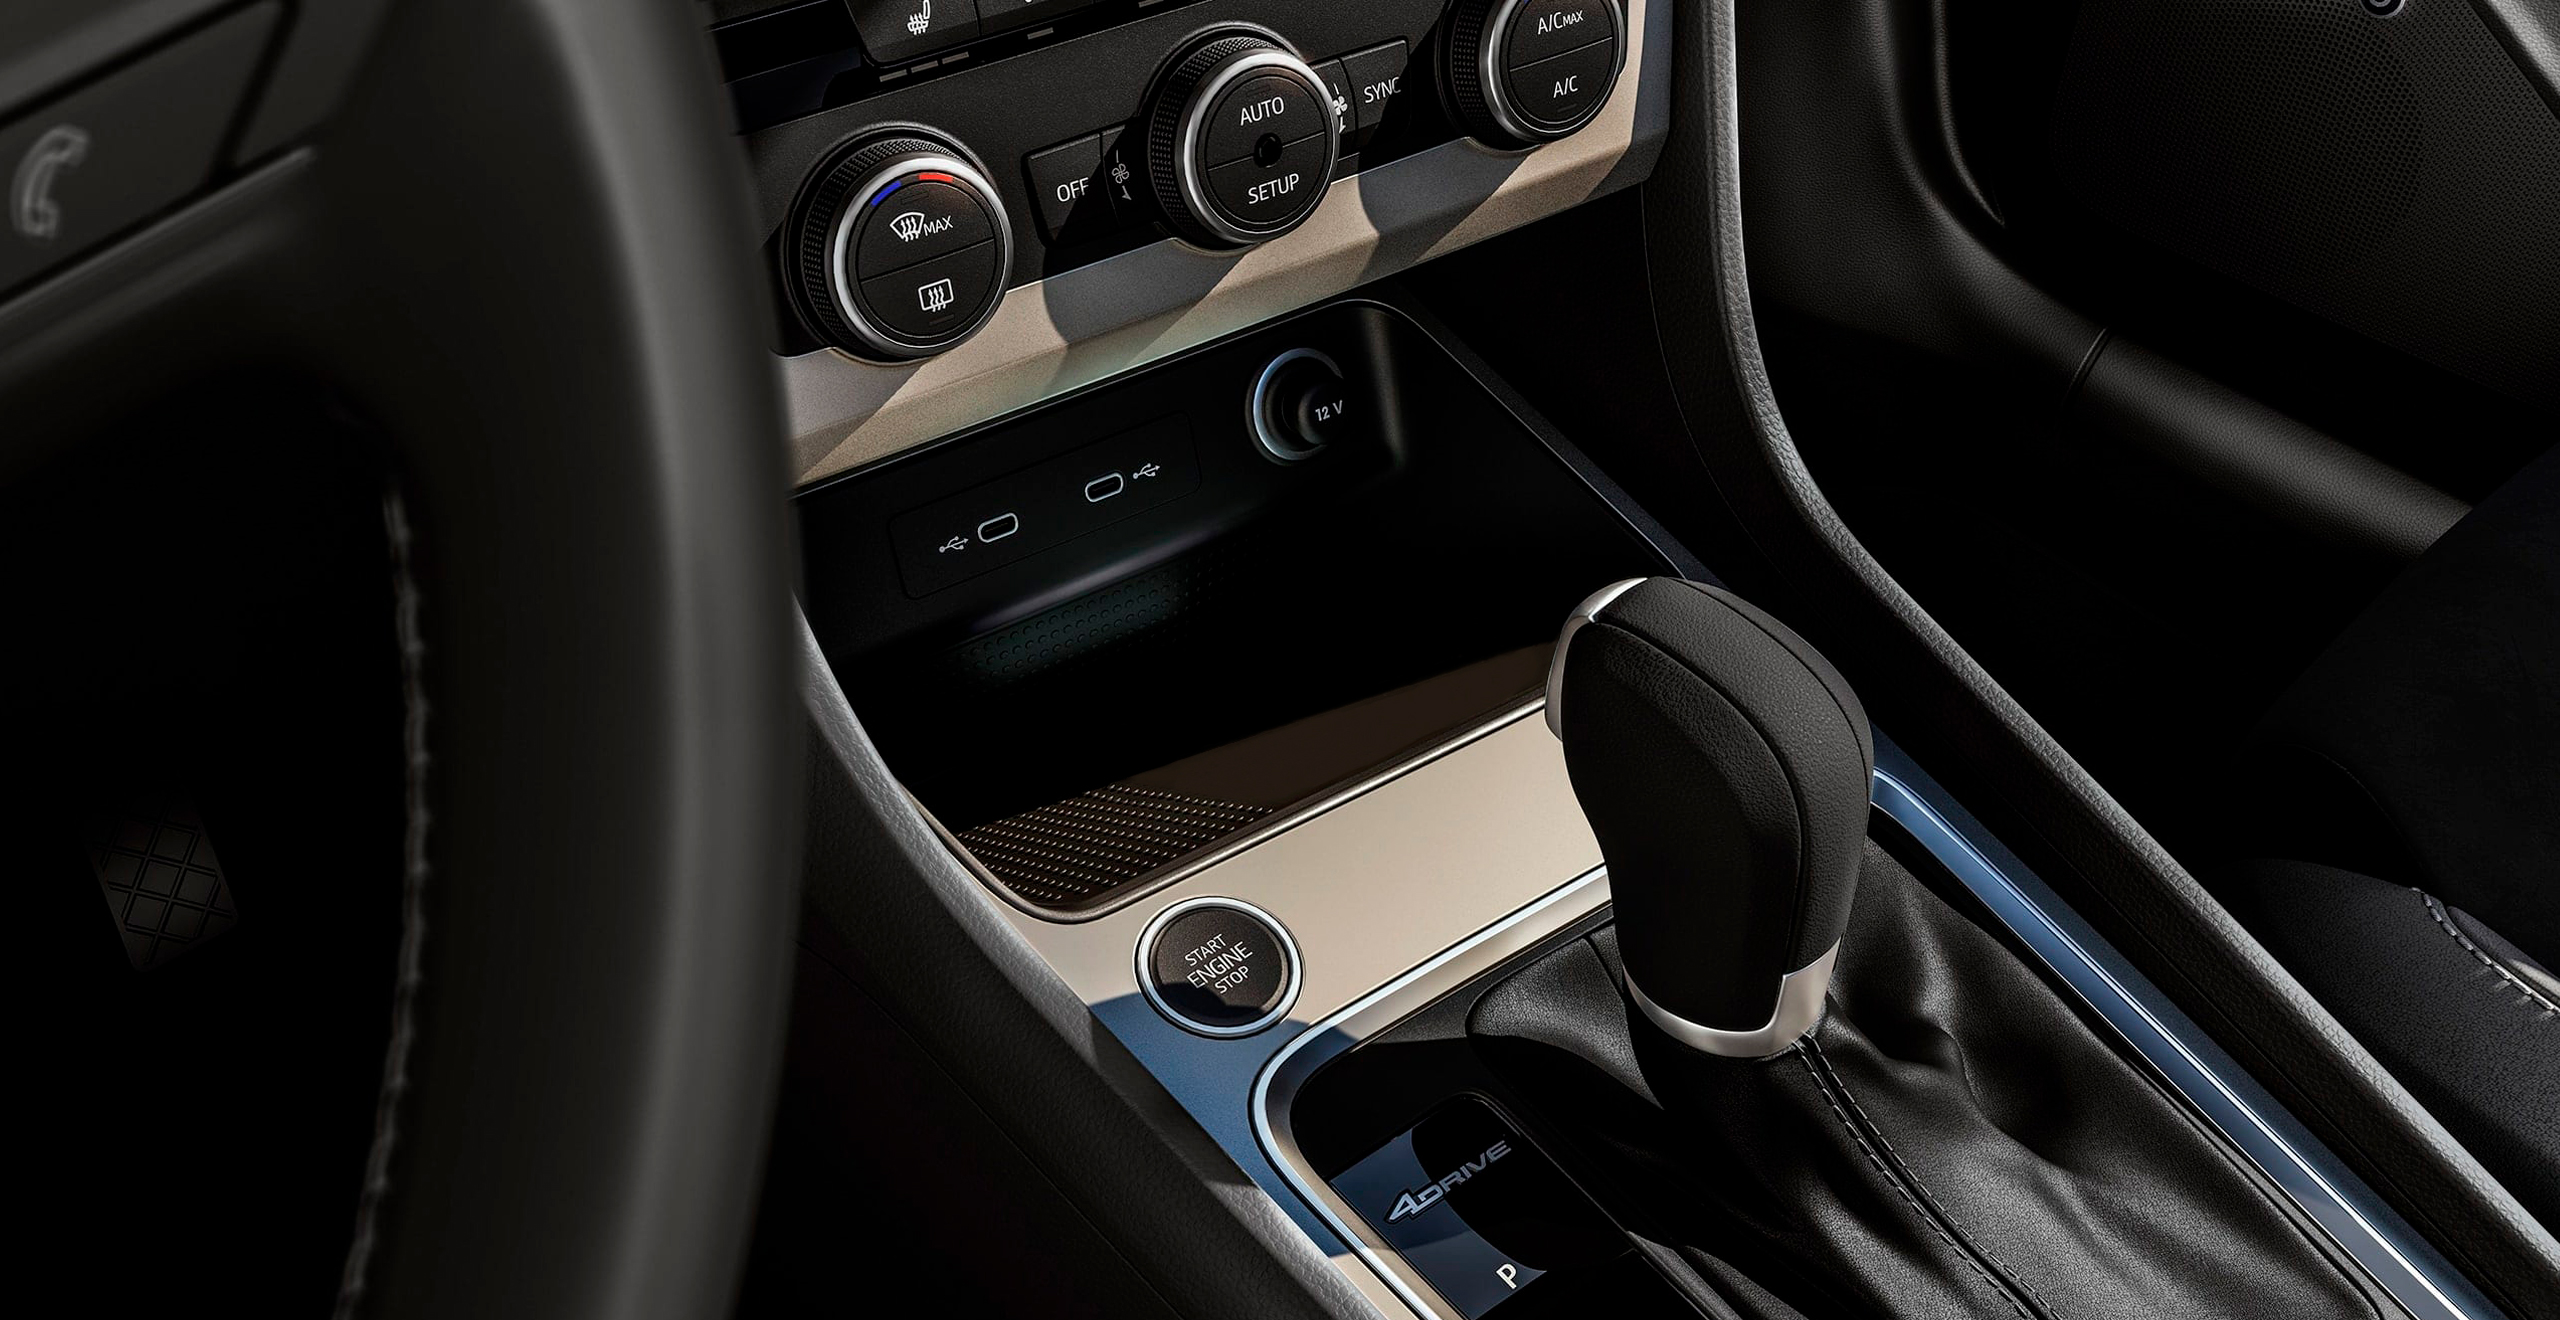 SEAT Arona interior console technology. Showing the SEAT Arona interior steering wheel driving and console technology 